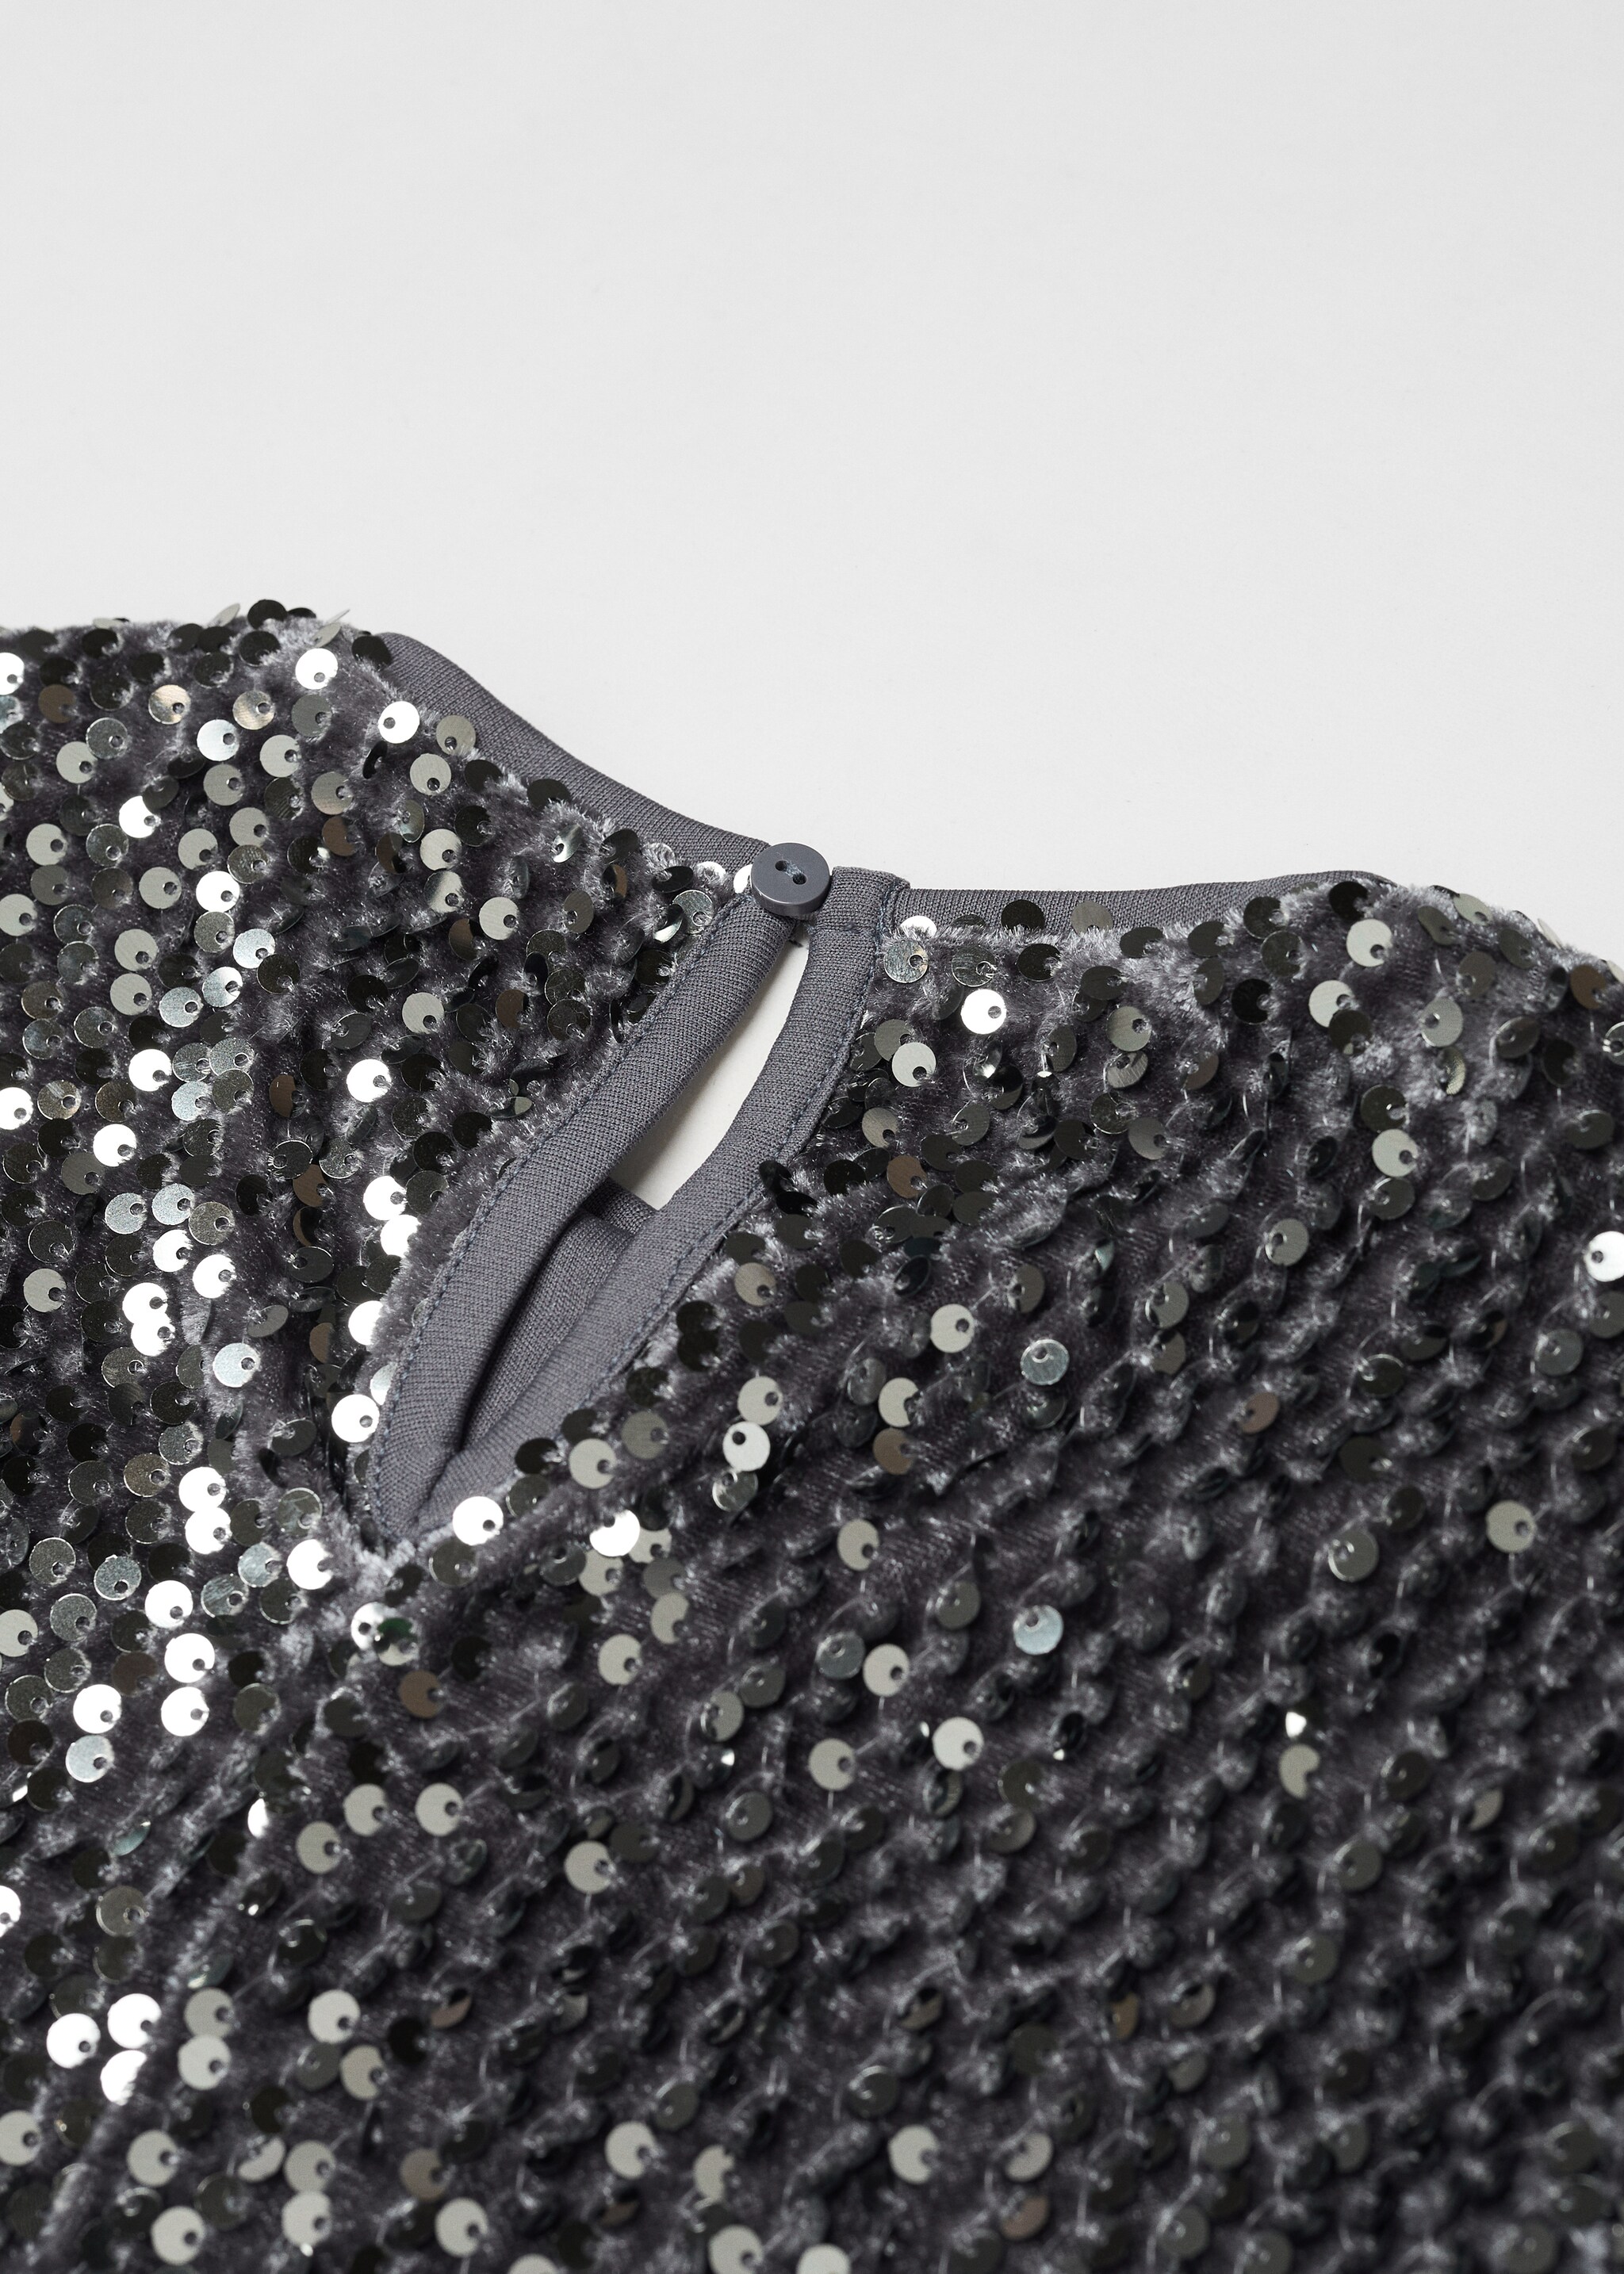 Sequined dress - Details of the article 8